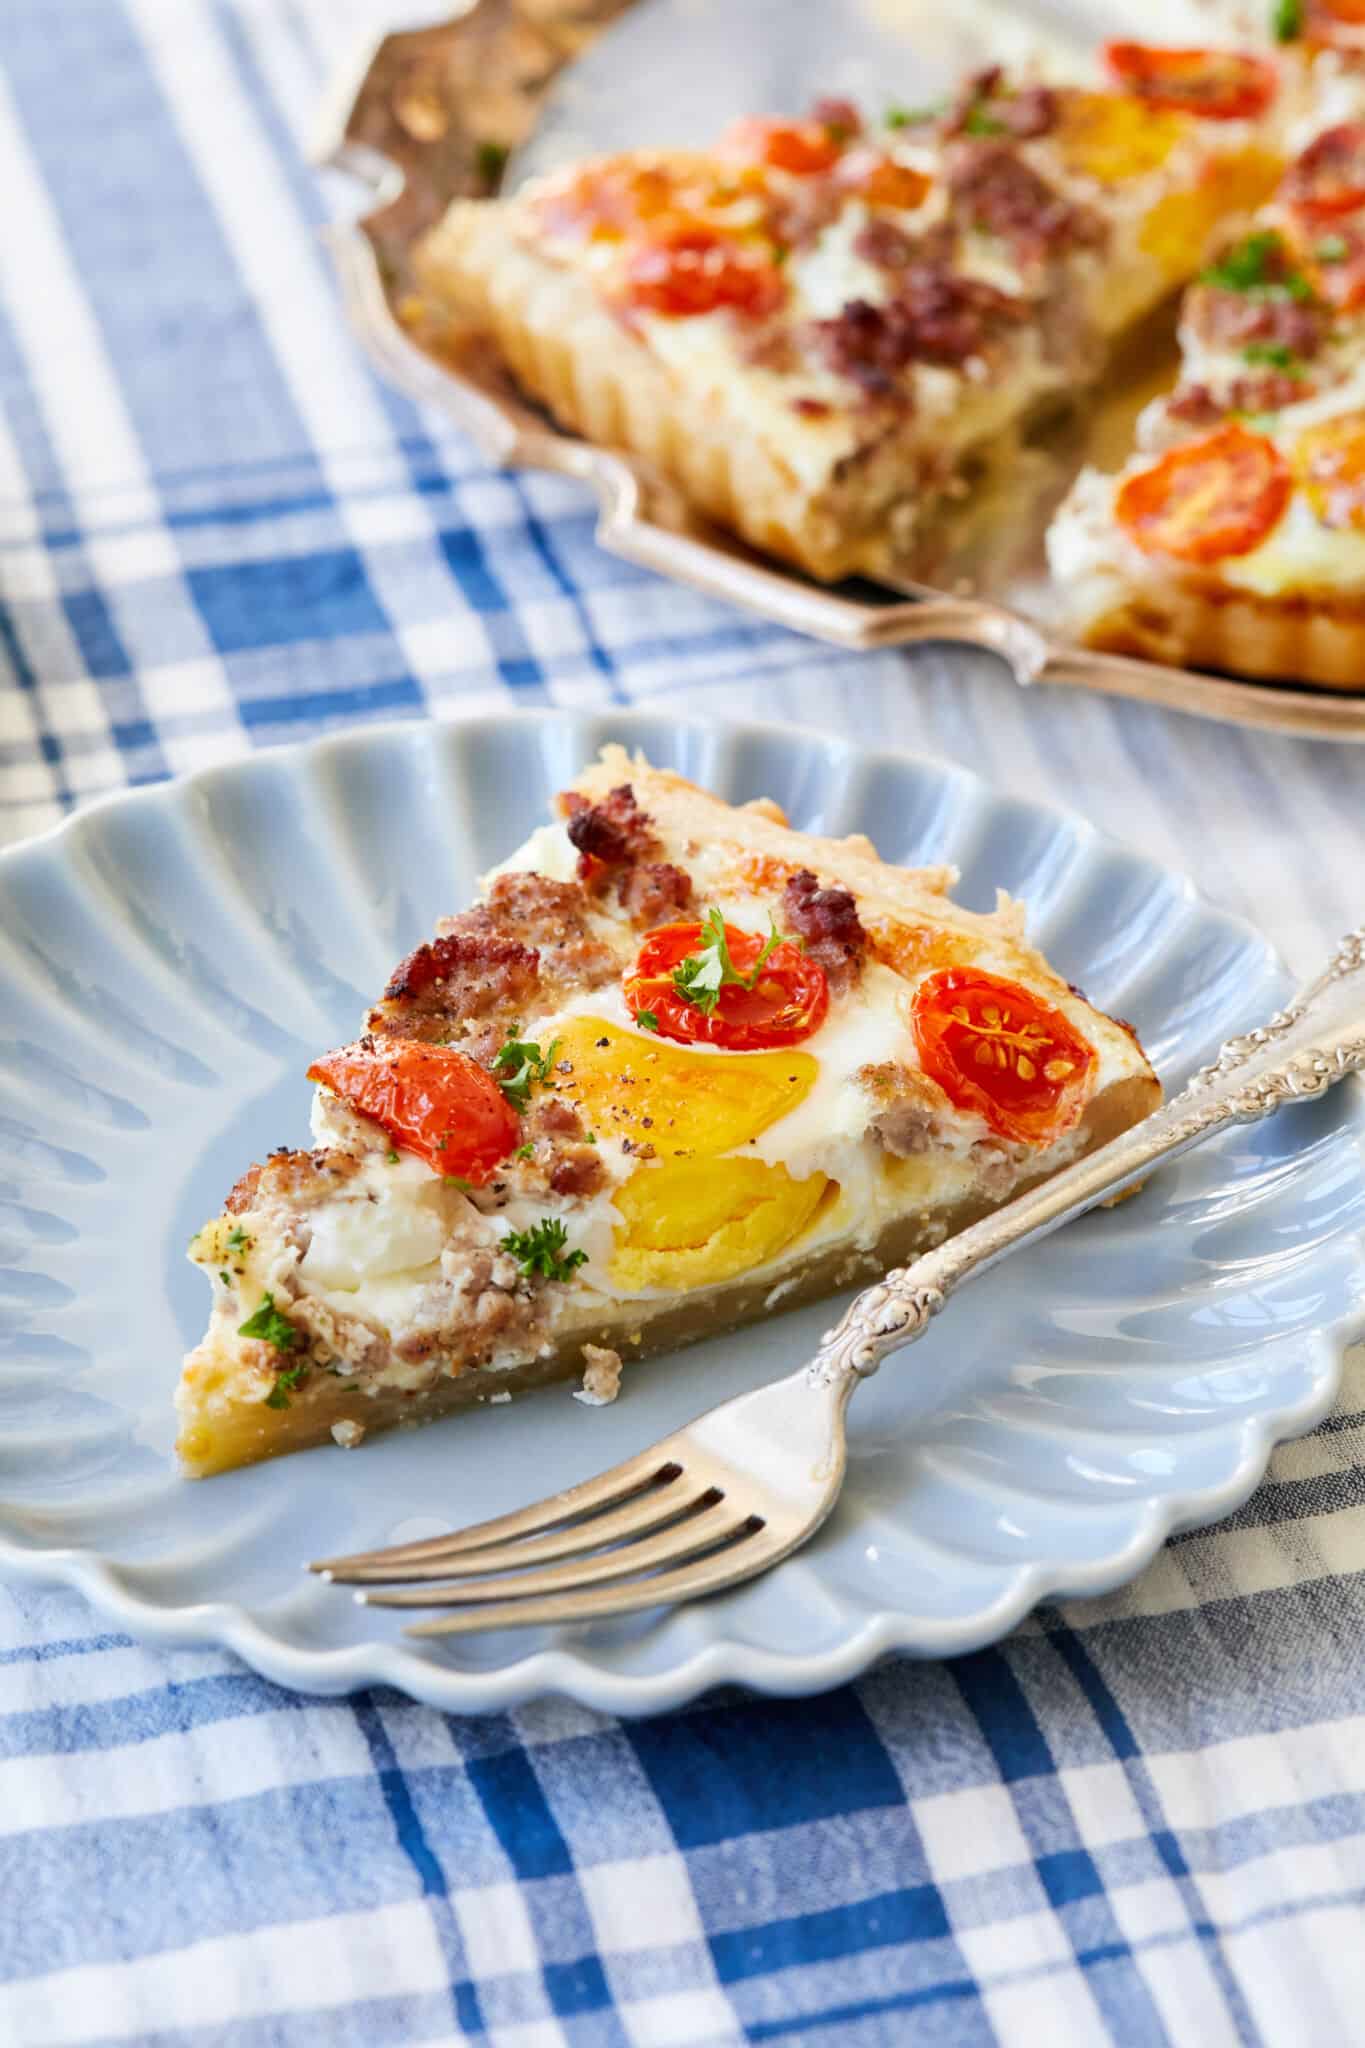 A close shot at a single slice of the Complete Breakfast Tart on a small blue scalloped-edge plate with a fork, showing the golden crust, savory sausage, melted creamy cheese, bright red cherry tomatoes, eggs and parsley. The rest of the tart is in a rose-gold platter in the upper right corner of the image. 